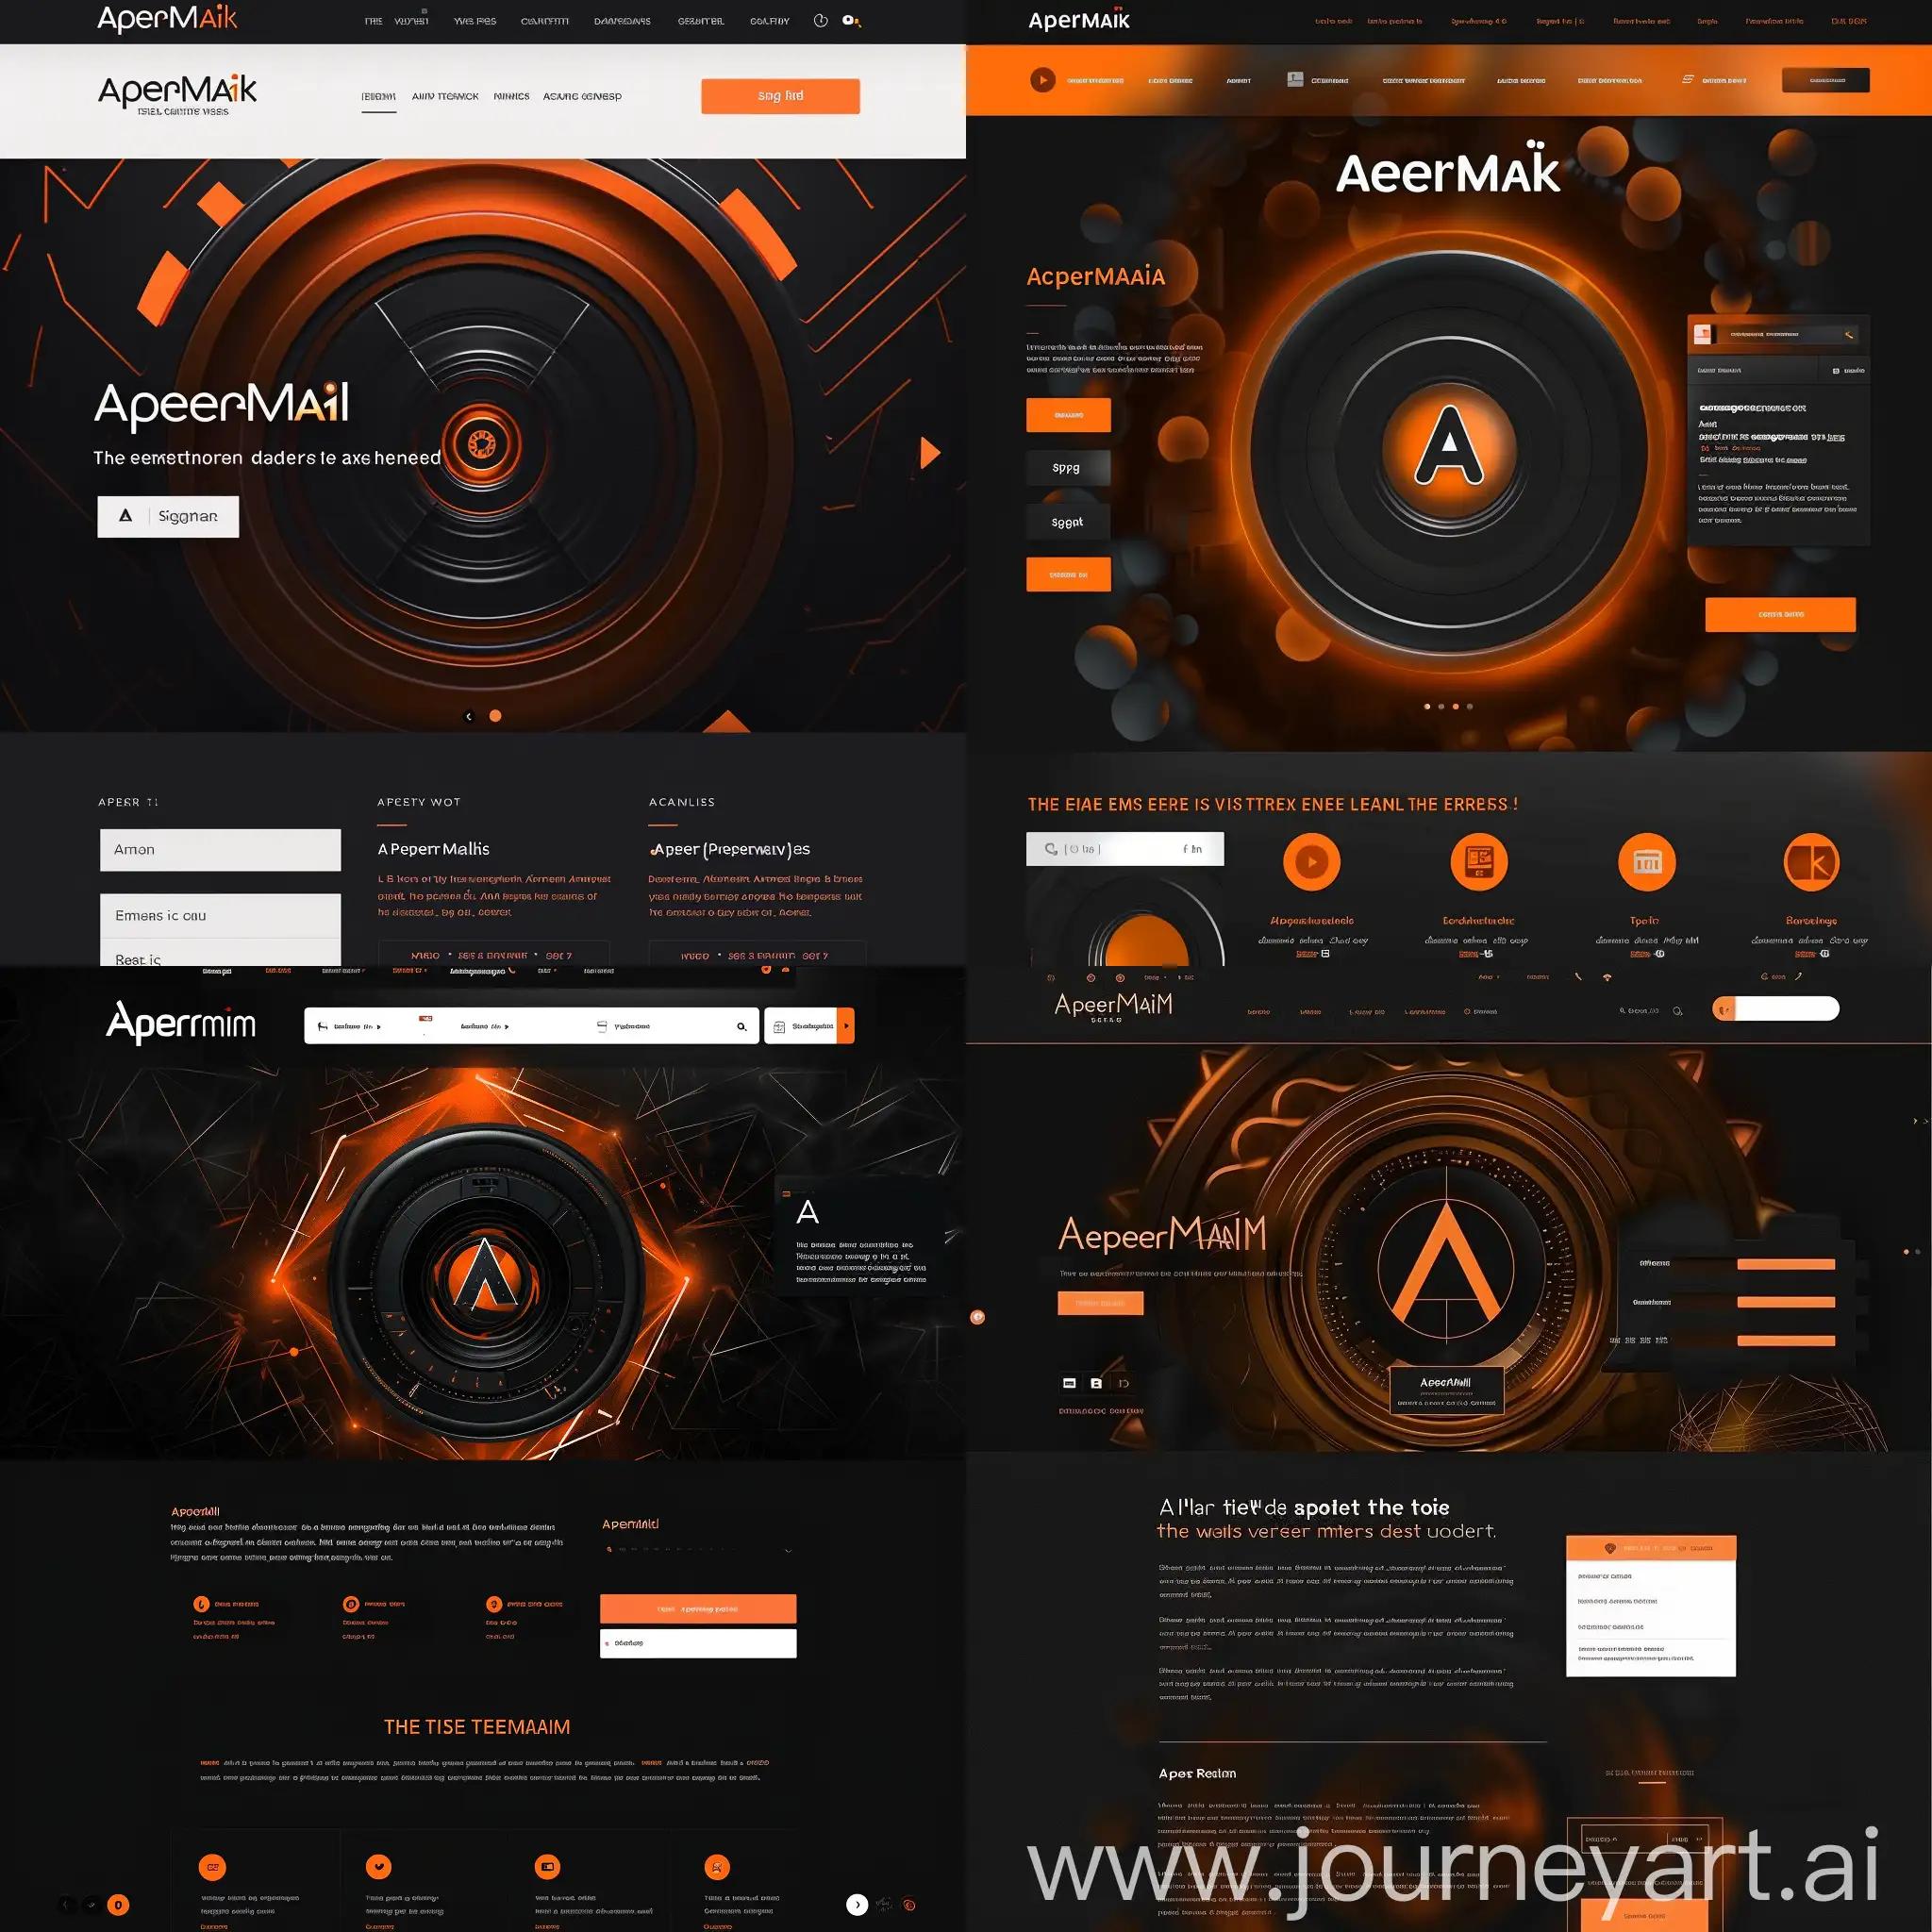 AperMail-Futuristic-Email-Service-Homepage-with-Aperture-Science-Theme